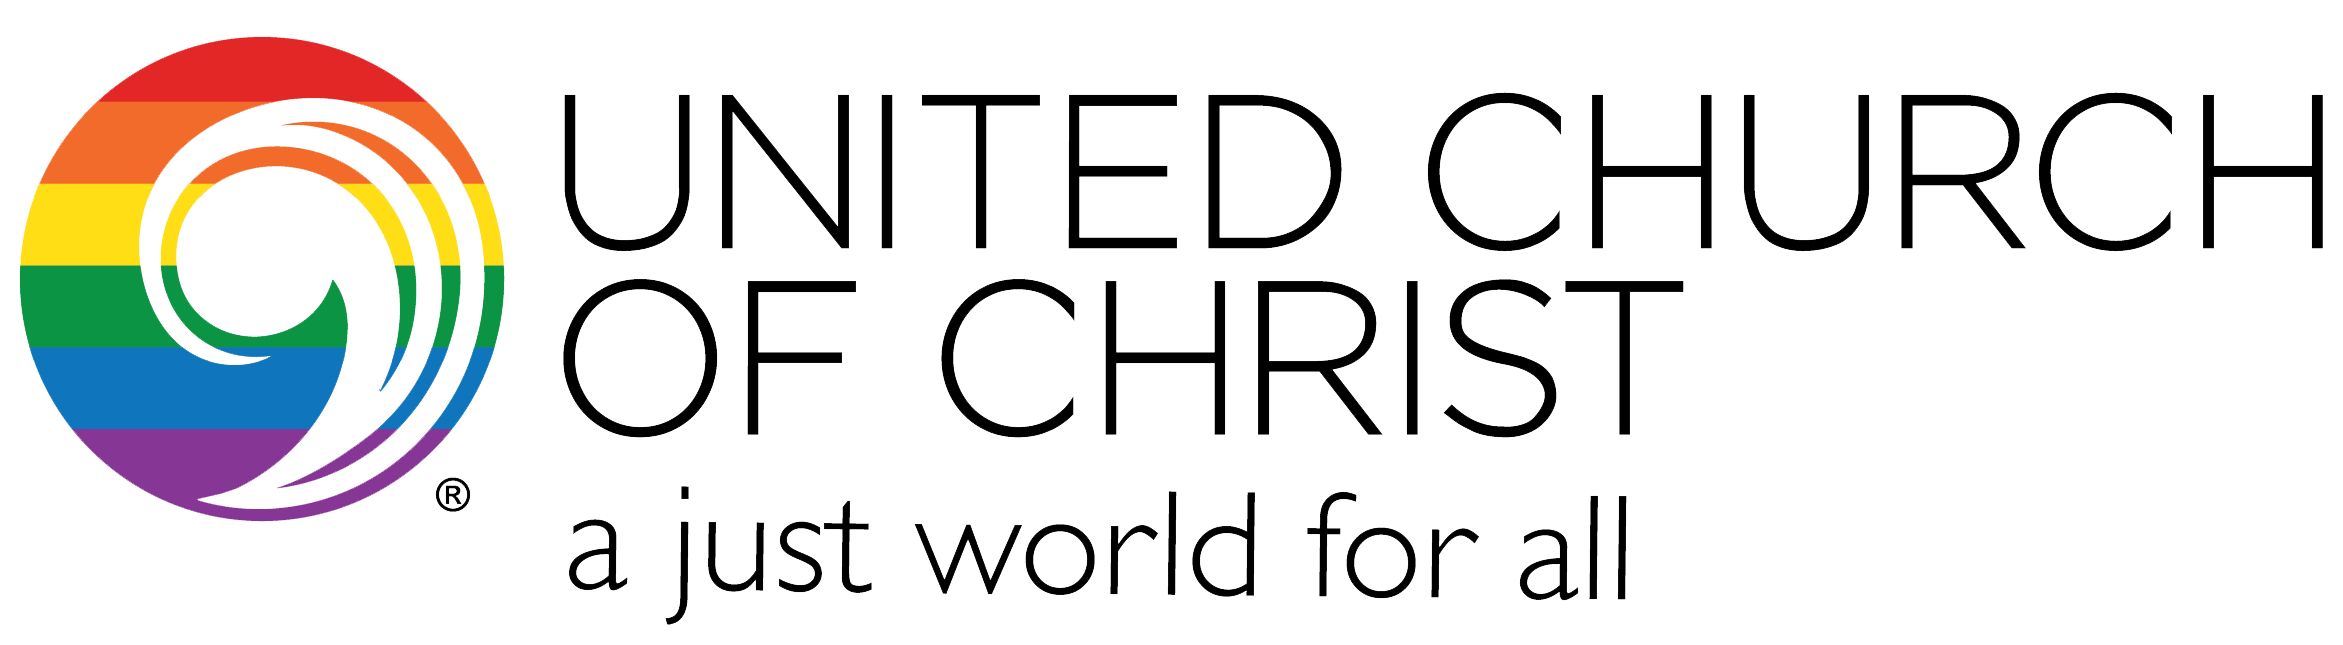 United Church of Christ is an Open and Affirming Church in Fairview Heights IL